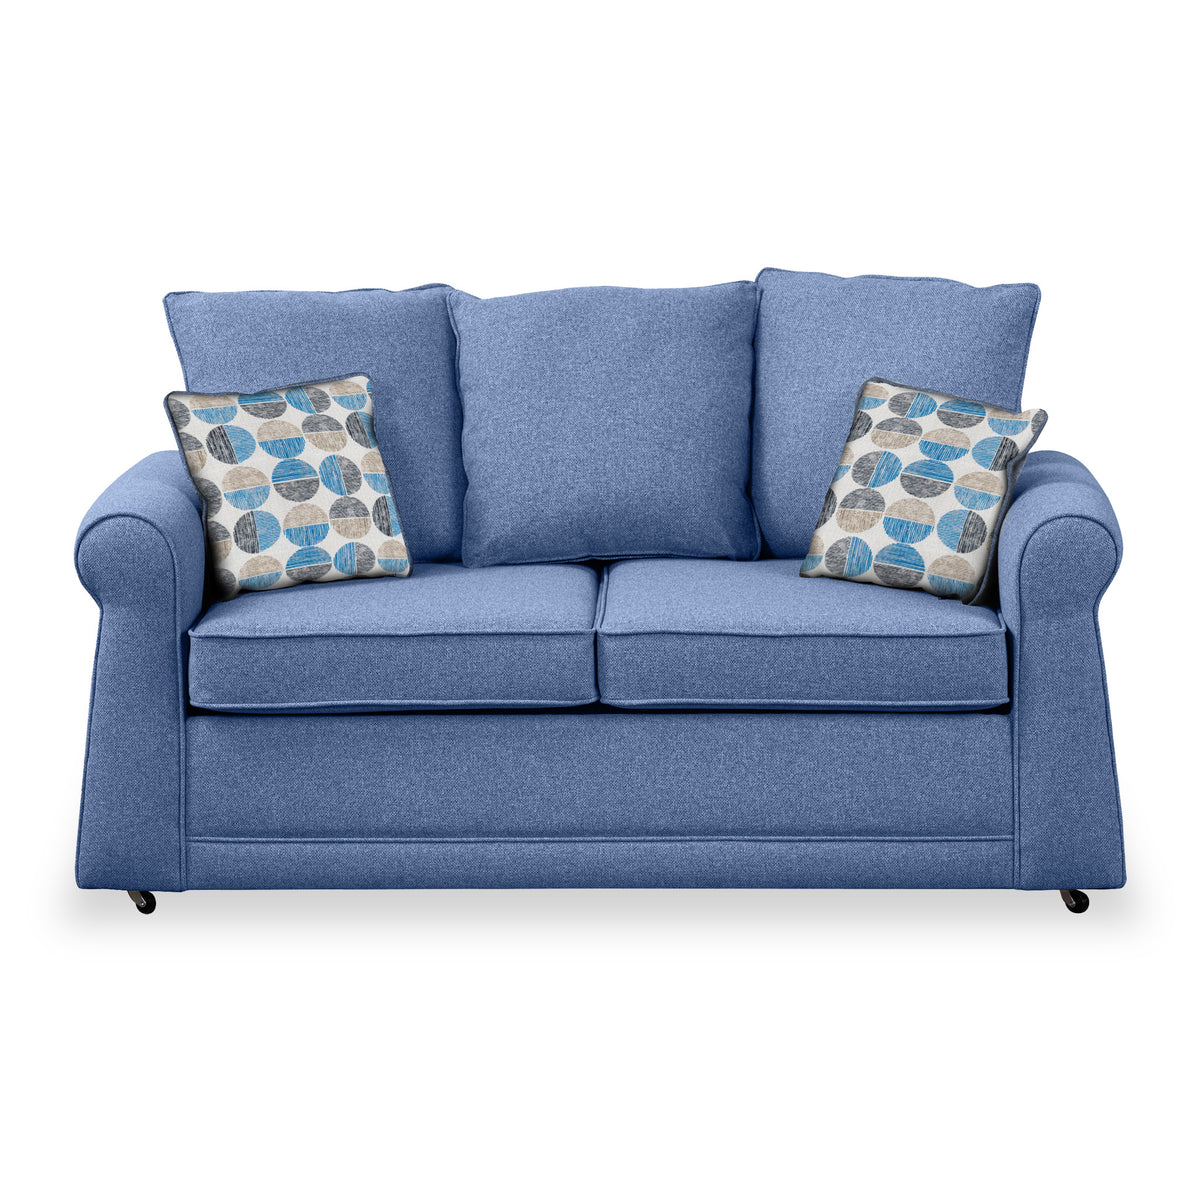 Broughton Denim Faux Linen 2 Seater Sofabed with Blue Scatter Cushions from Roseland Furniture